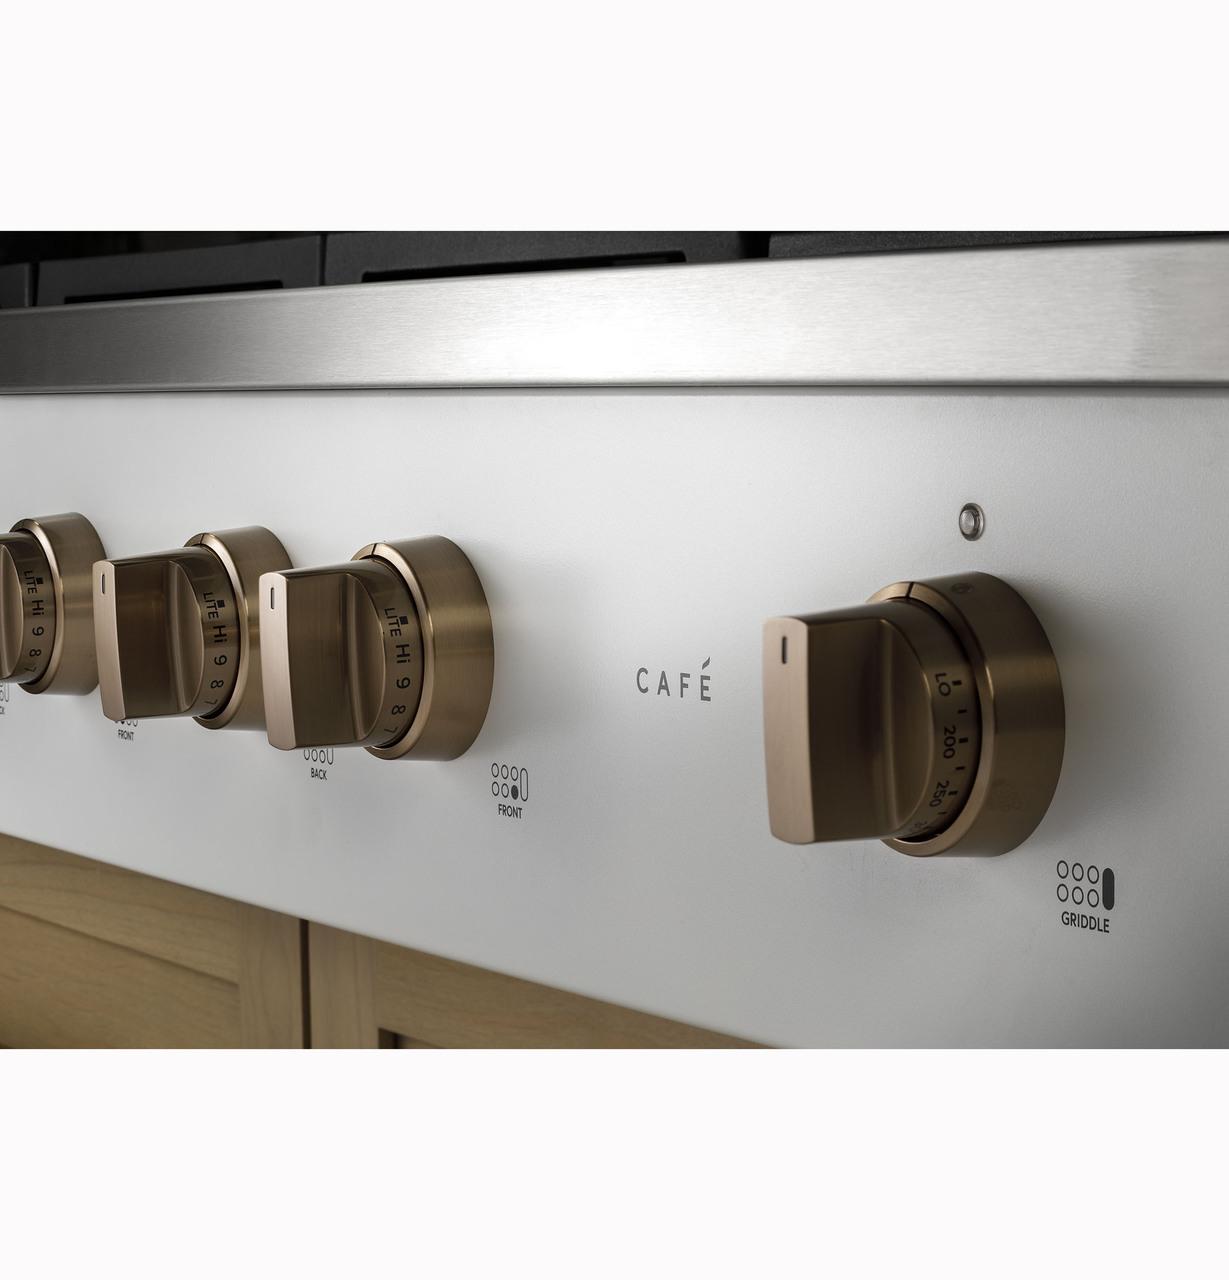 Cafe Caf(eback)™ 48" Commercial-Style Gas Rangetop with 6 Burners and Integrated Griddle (Natural Gas)